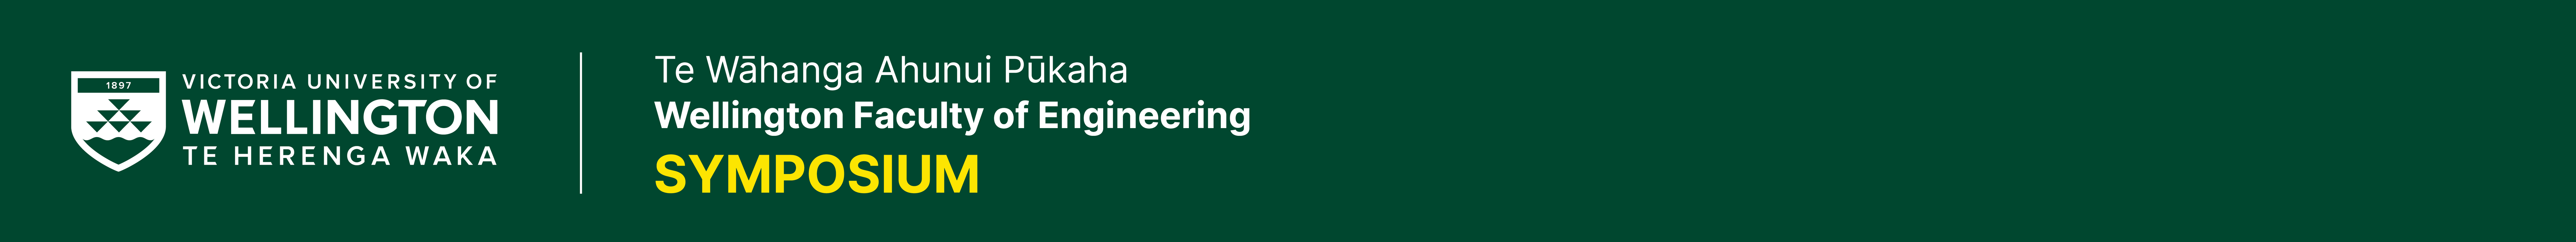 Banner for Wellington Faculty of Engineering Symposium